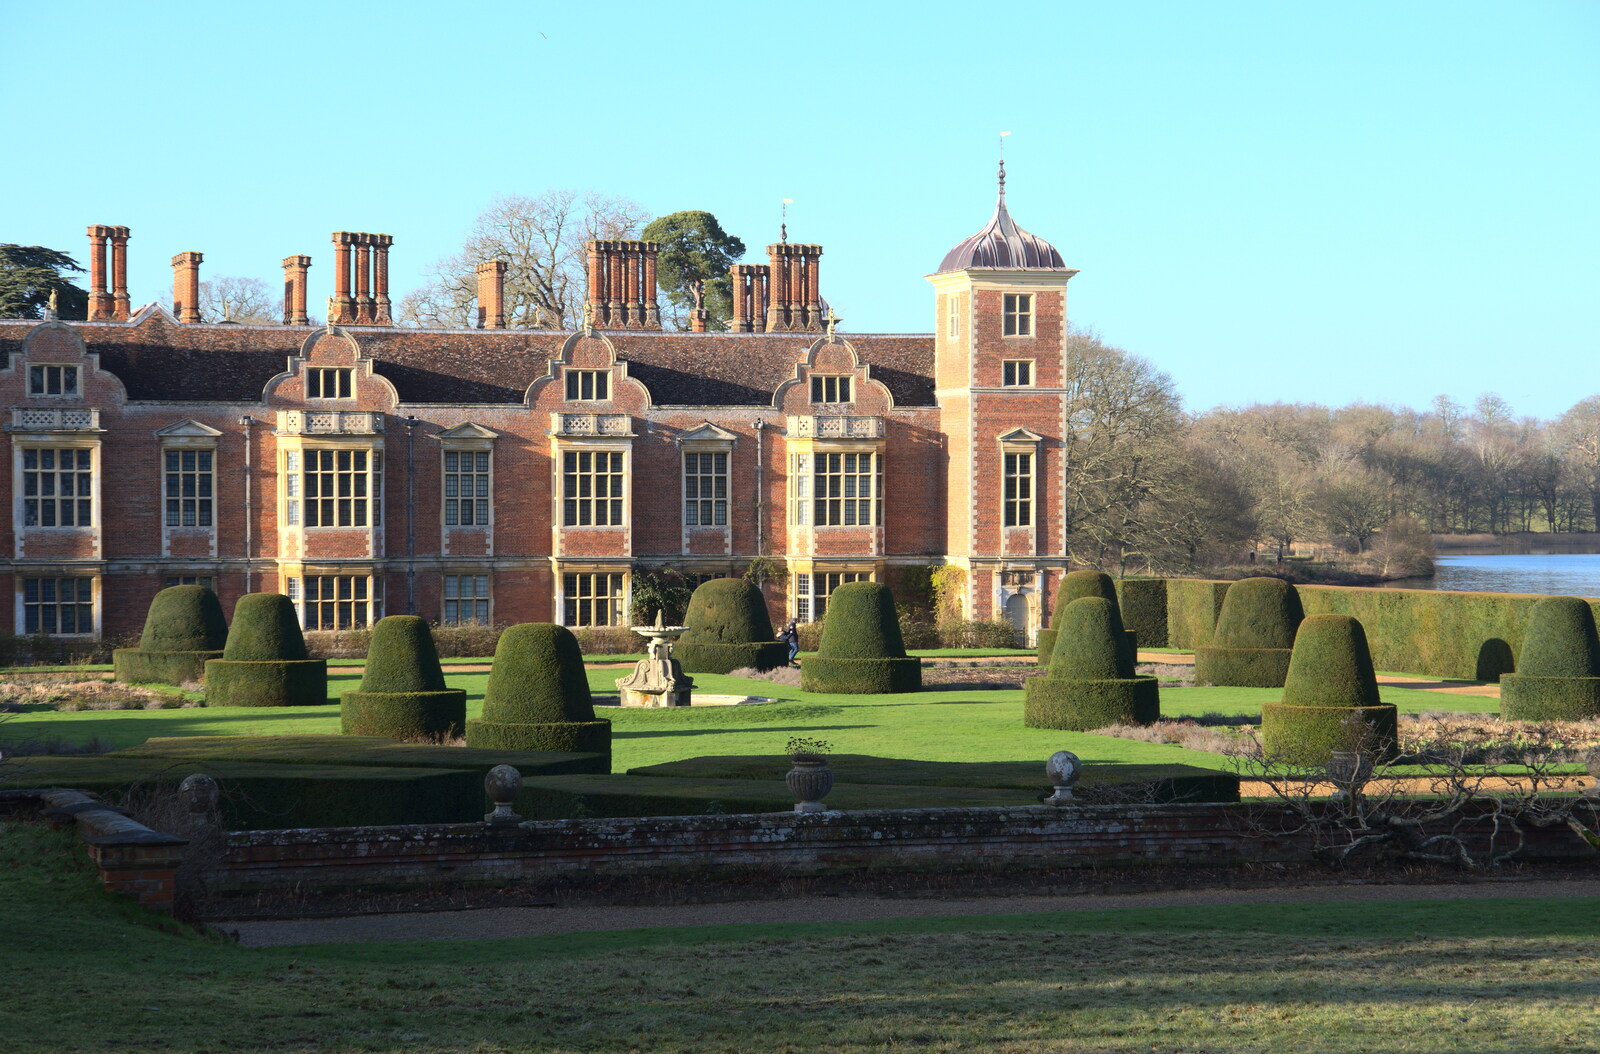 The thimble topiary of Blickling from A Visit to Blickling Hall, Aylsham, Norfolk - 9th January 2022